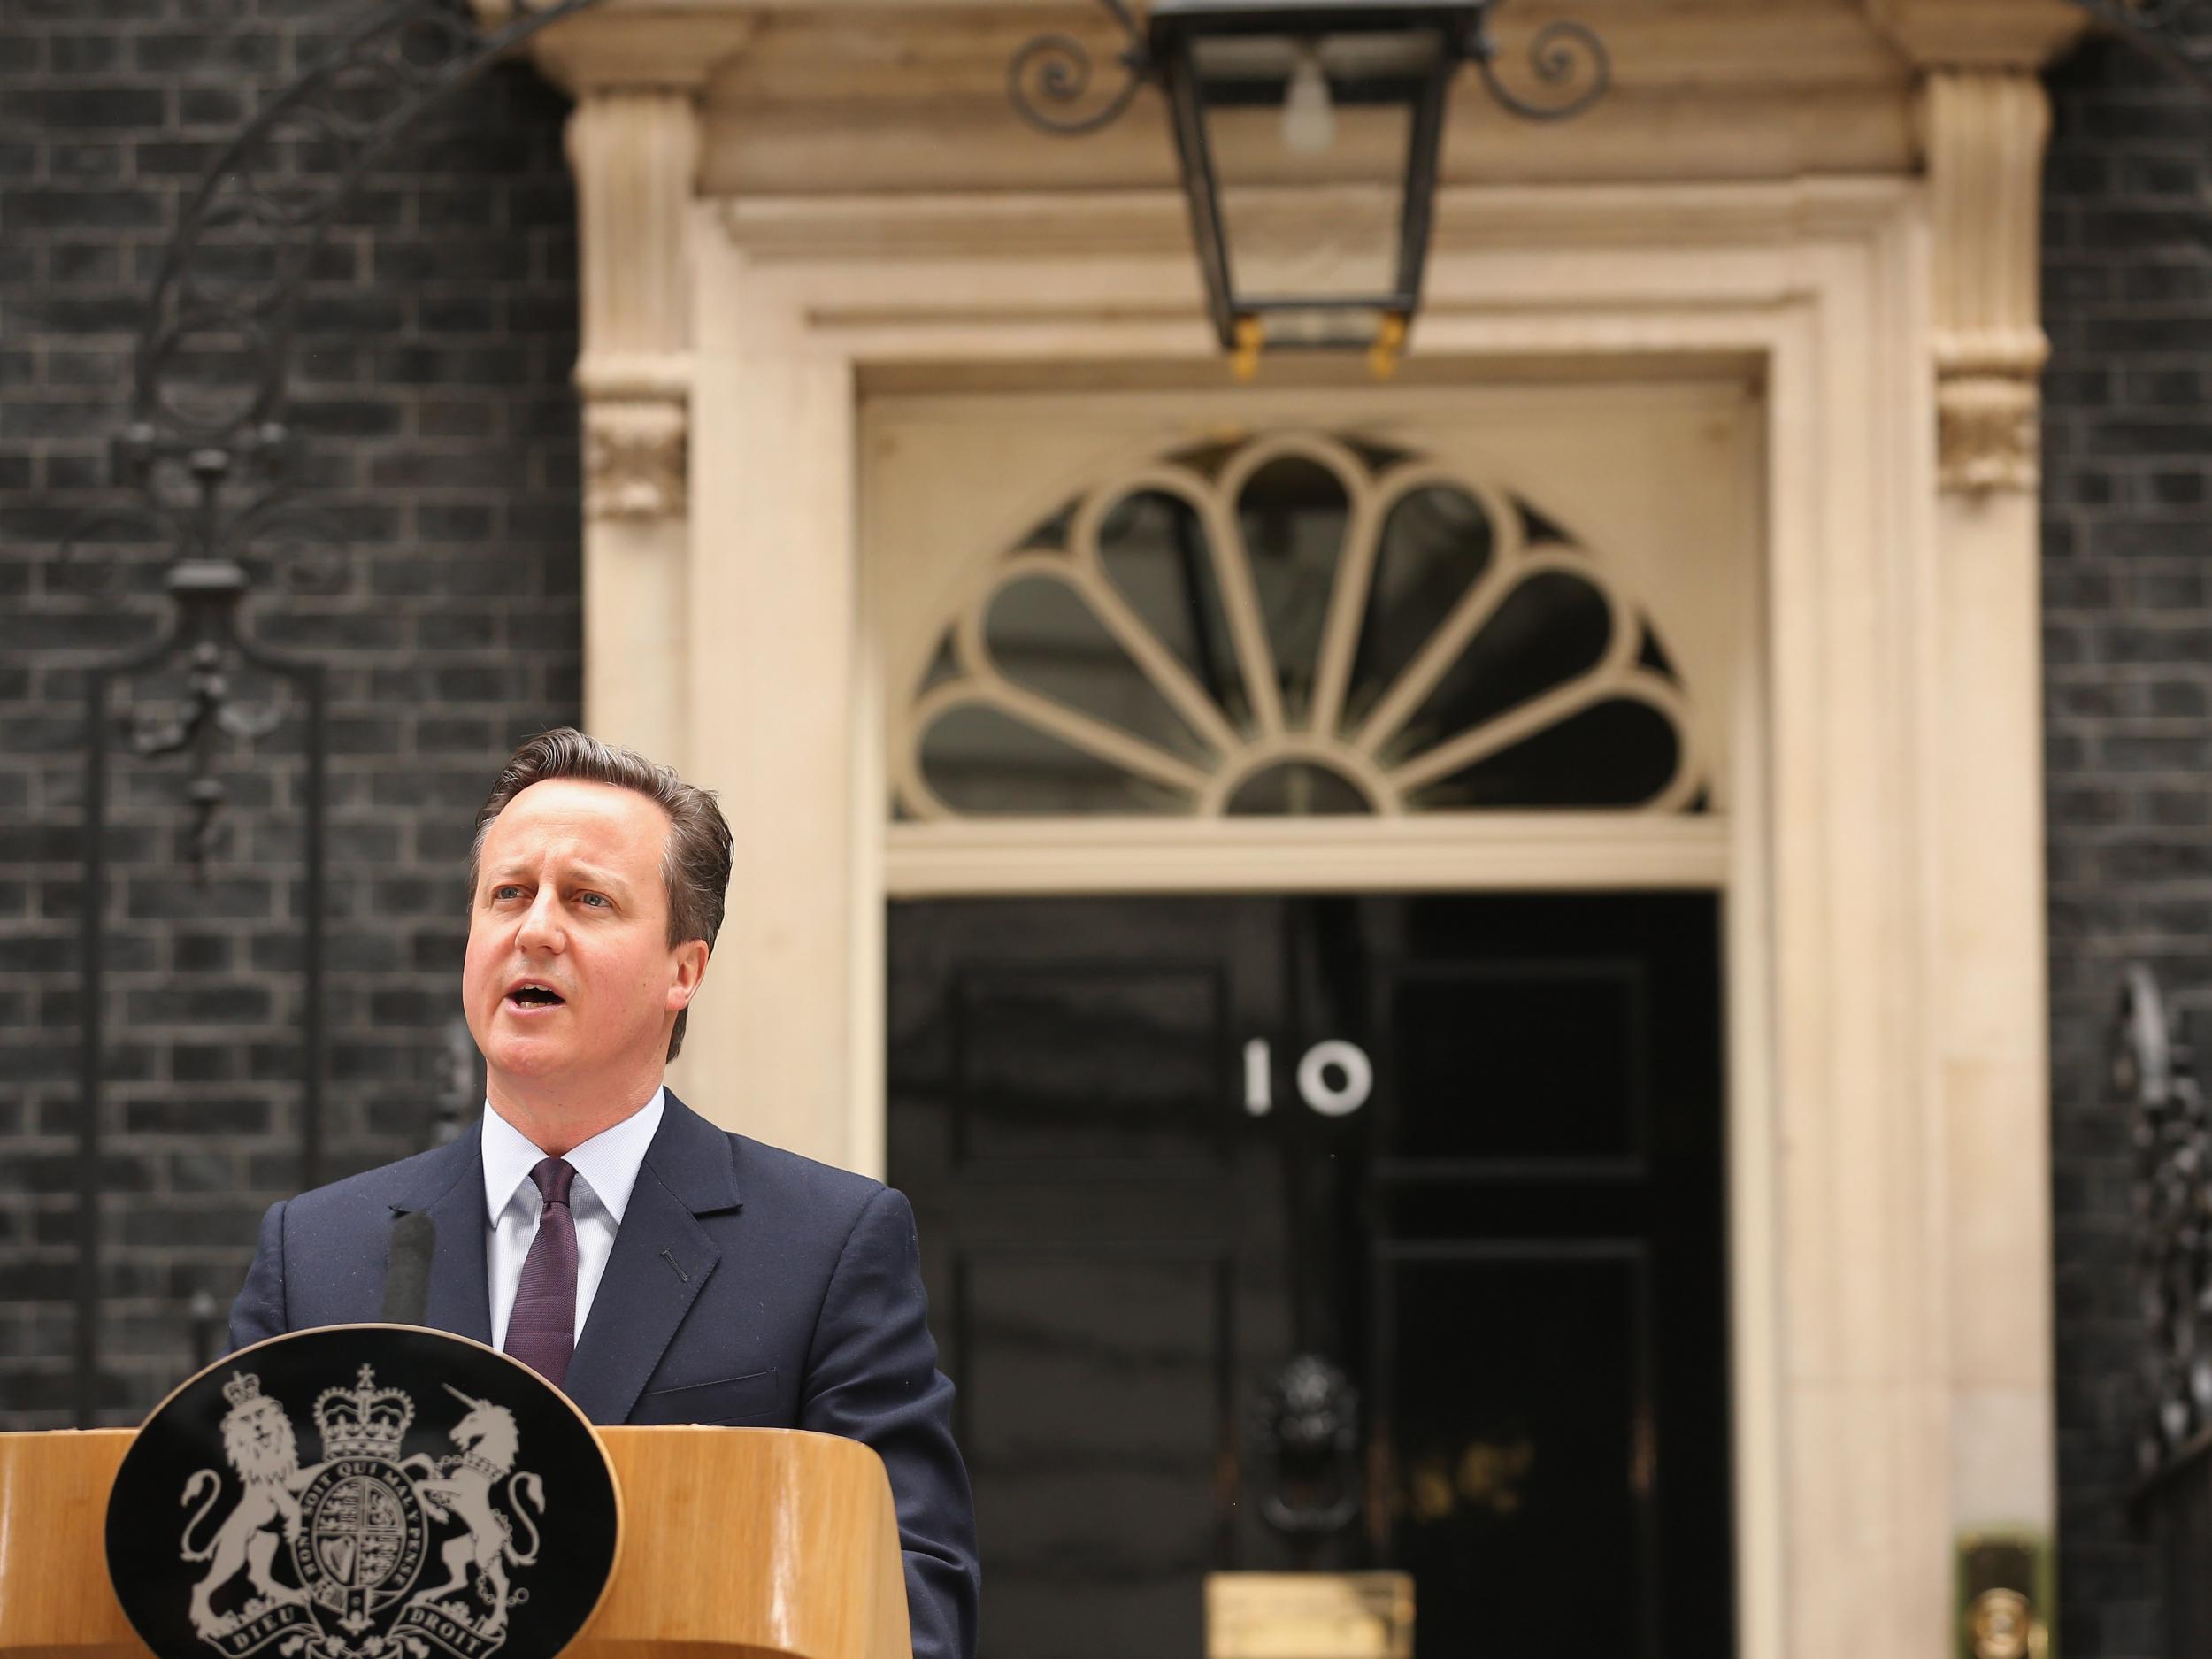 British Prime Minister David Cameron delivers a speech outside10 Downing Street on May 8, 2015 in London, England